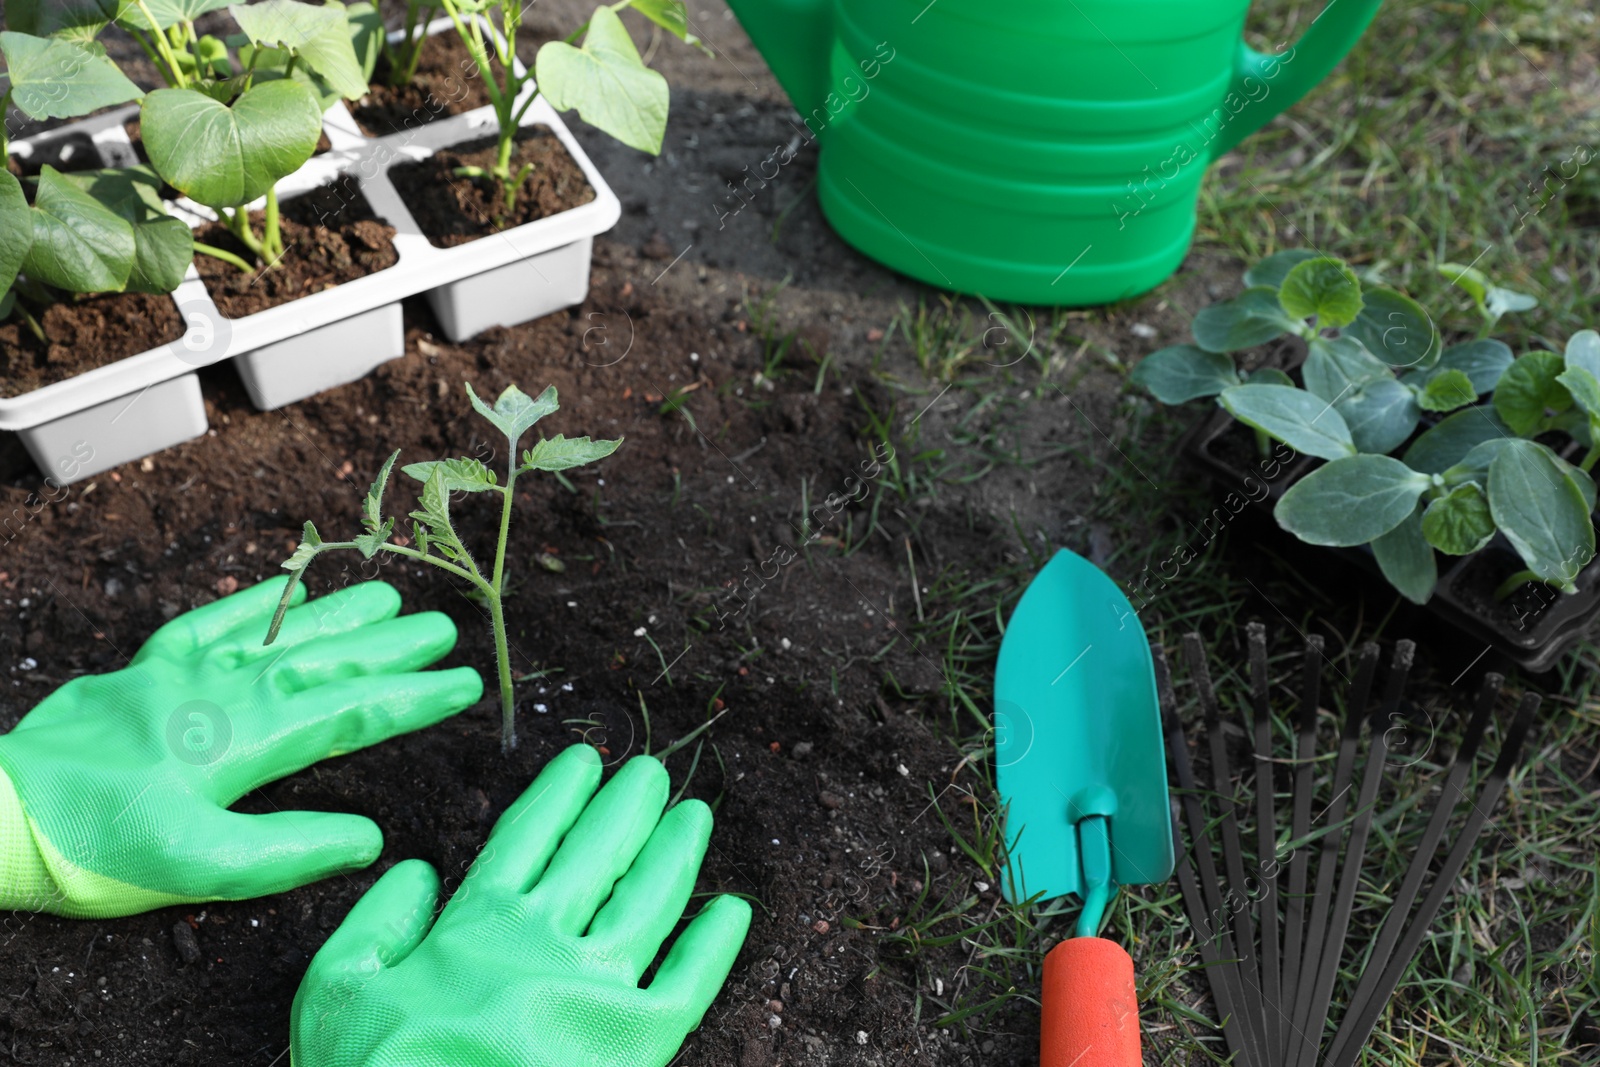 Photo of Woman wearing gardening gloves transplanting seedling from plastic container in ground outdoors, closeup